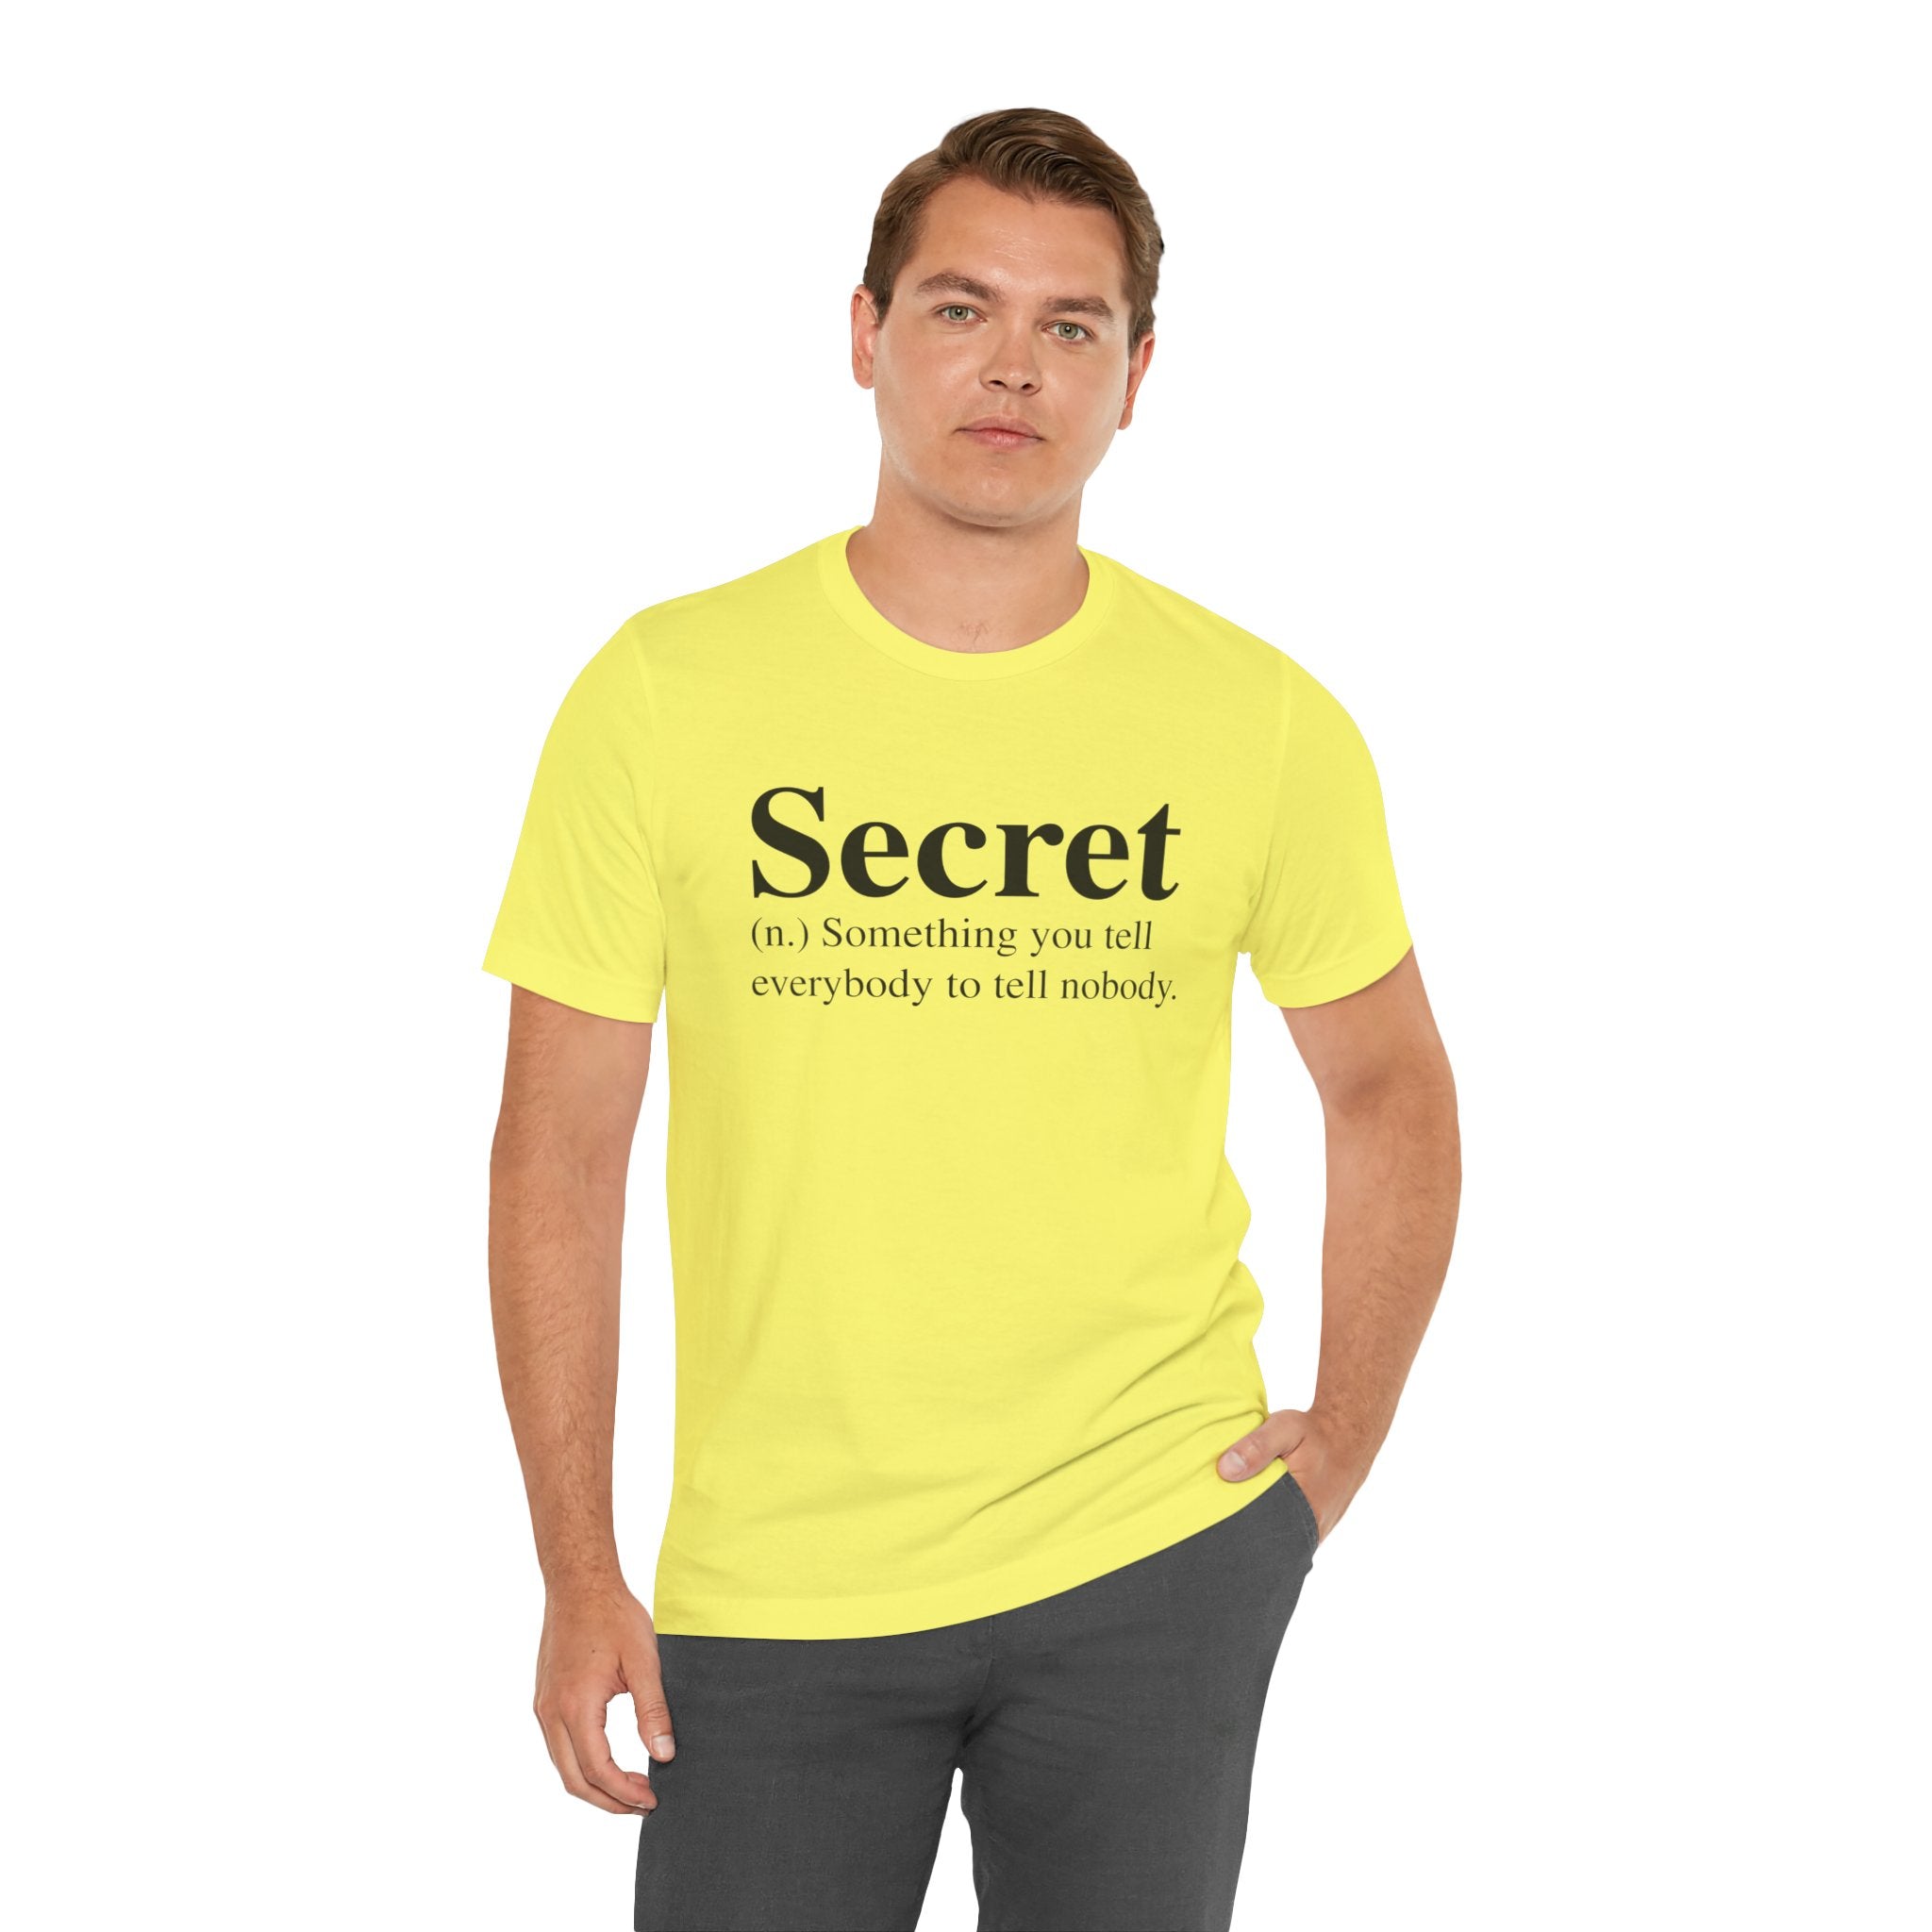 A man wearing a bright yellow Secret T - Shirt with the text "secret (n.) something you tell everybody to tell nobody.